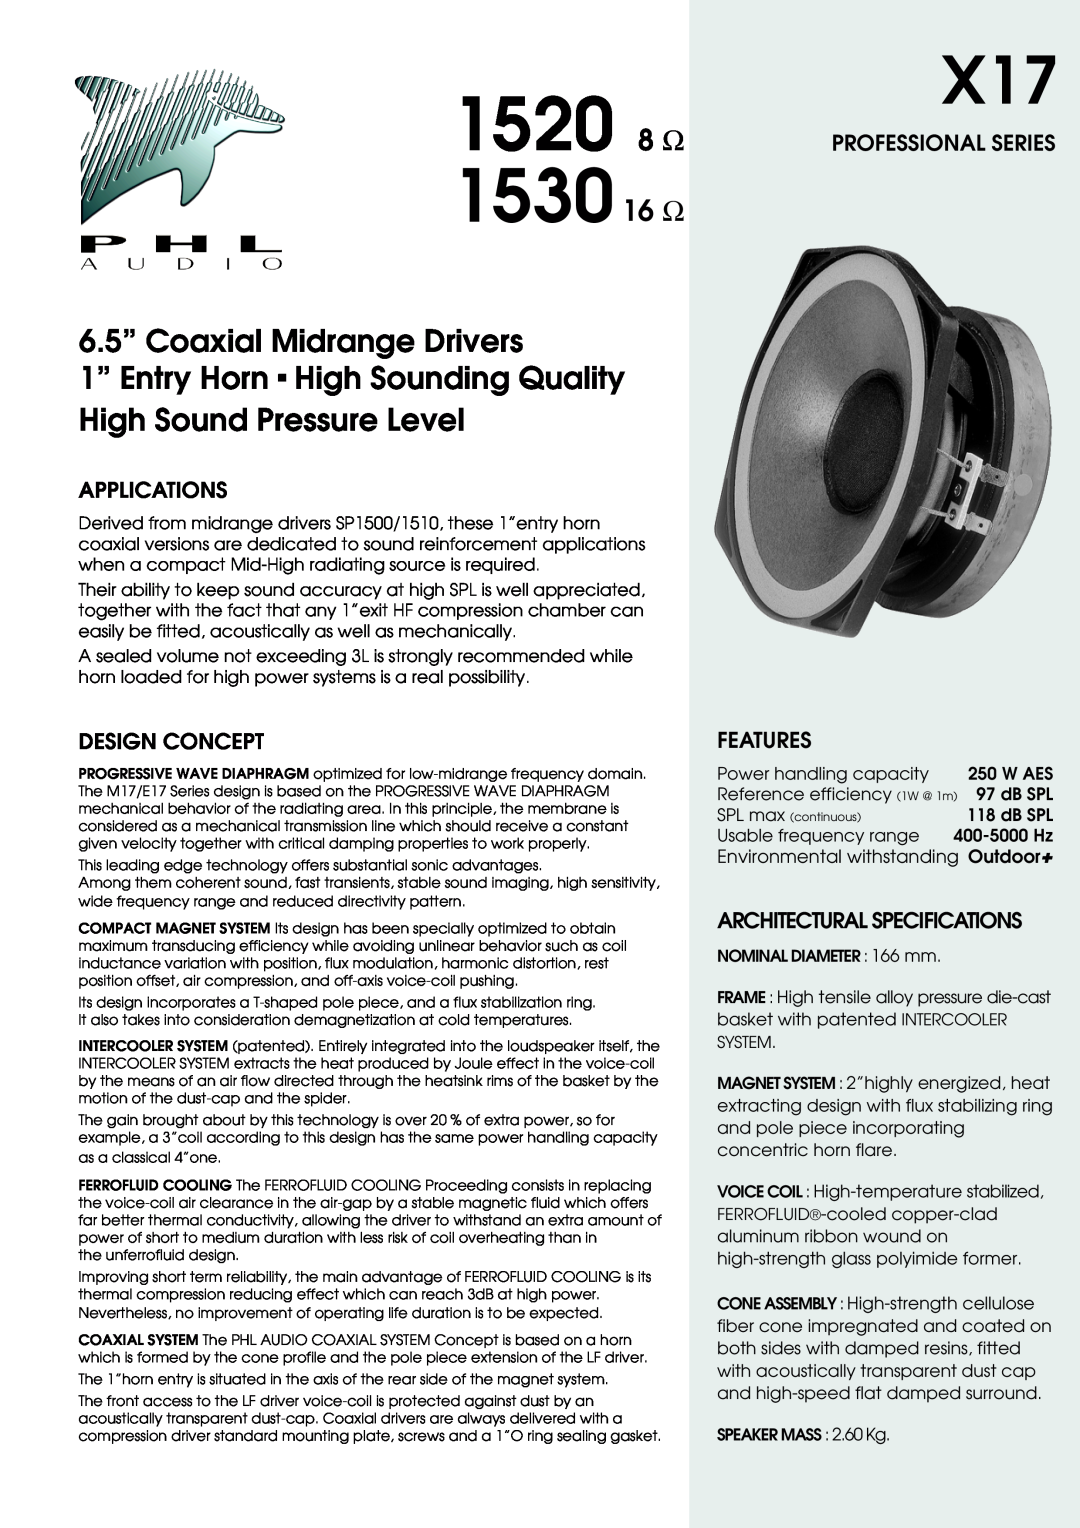 PHL Audio X17 specifications Applications, Design Concept, Features, Architectural Specifications, 1520 8 Ω, 1530 16 Ω 